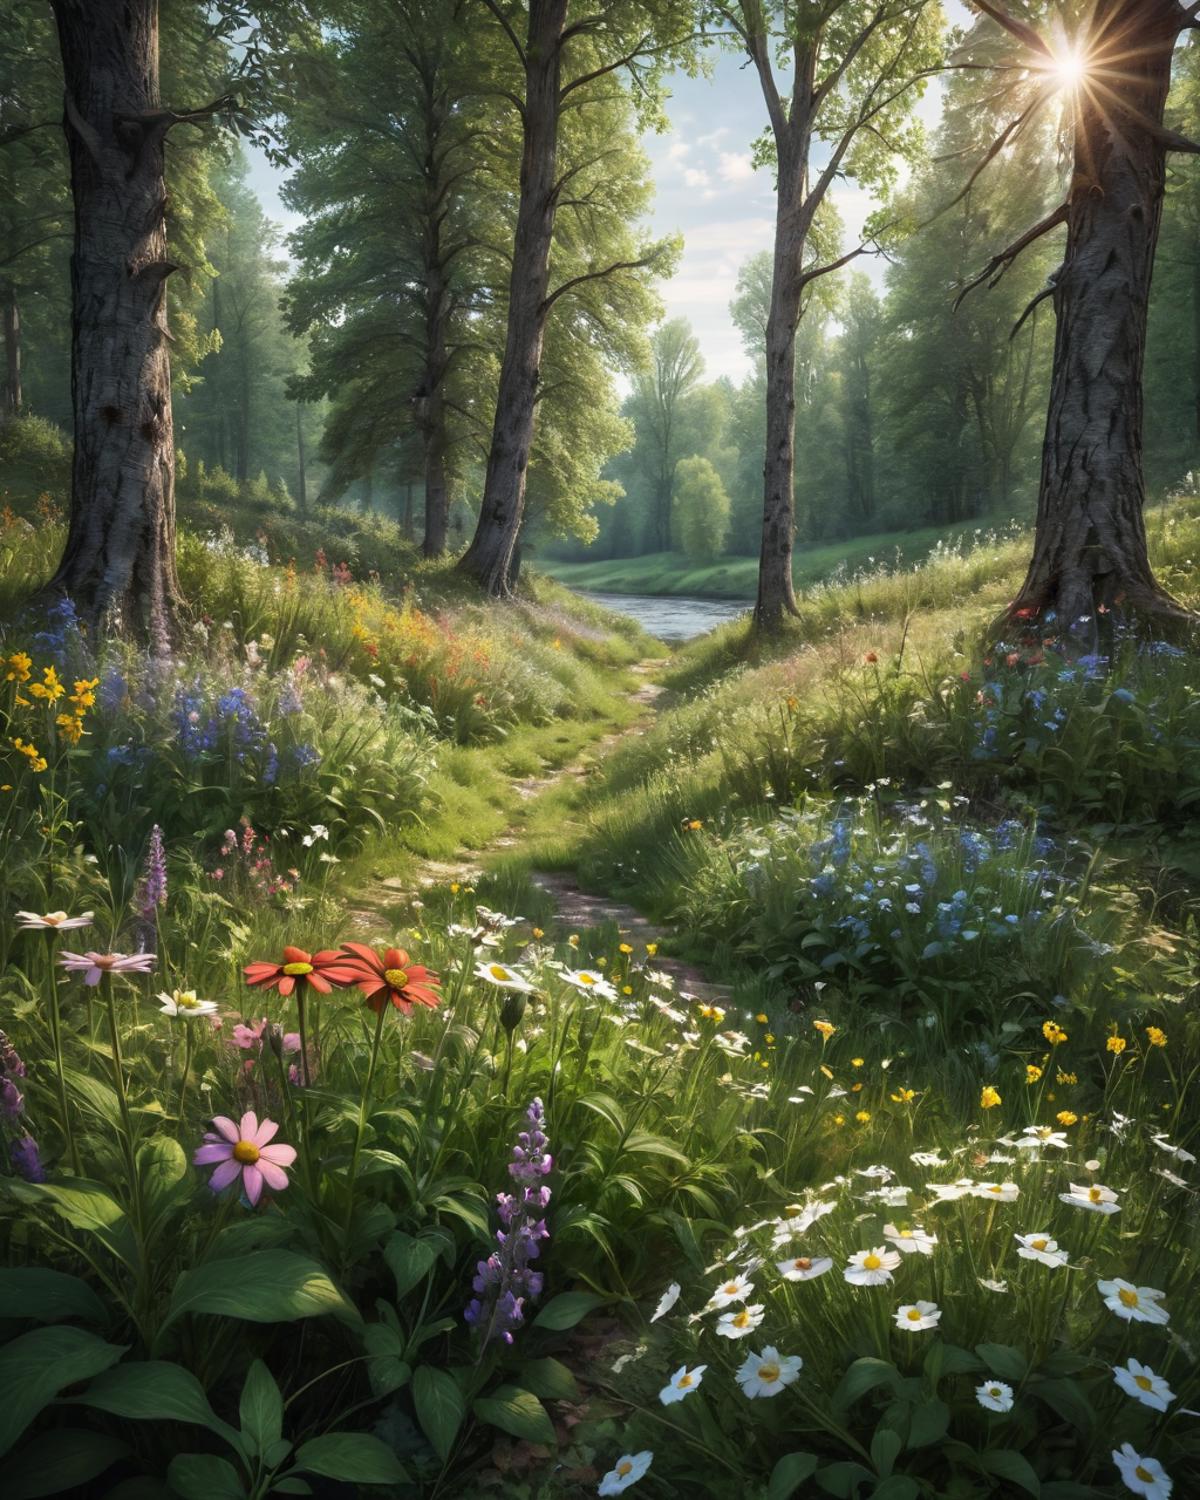 A Path Between Trees Lined With Wildflowers in a Field